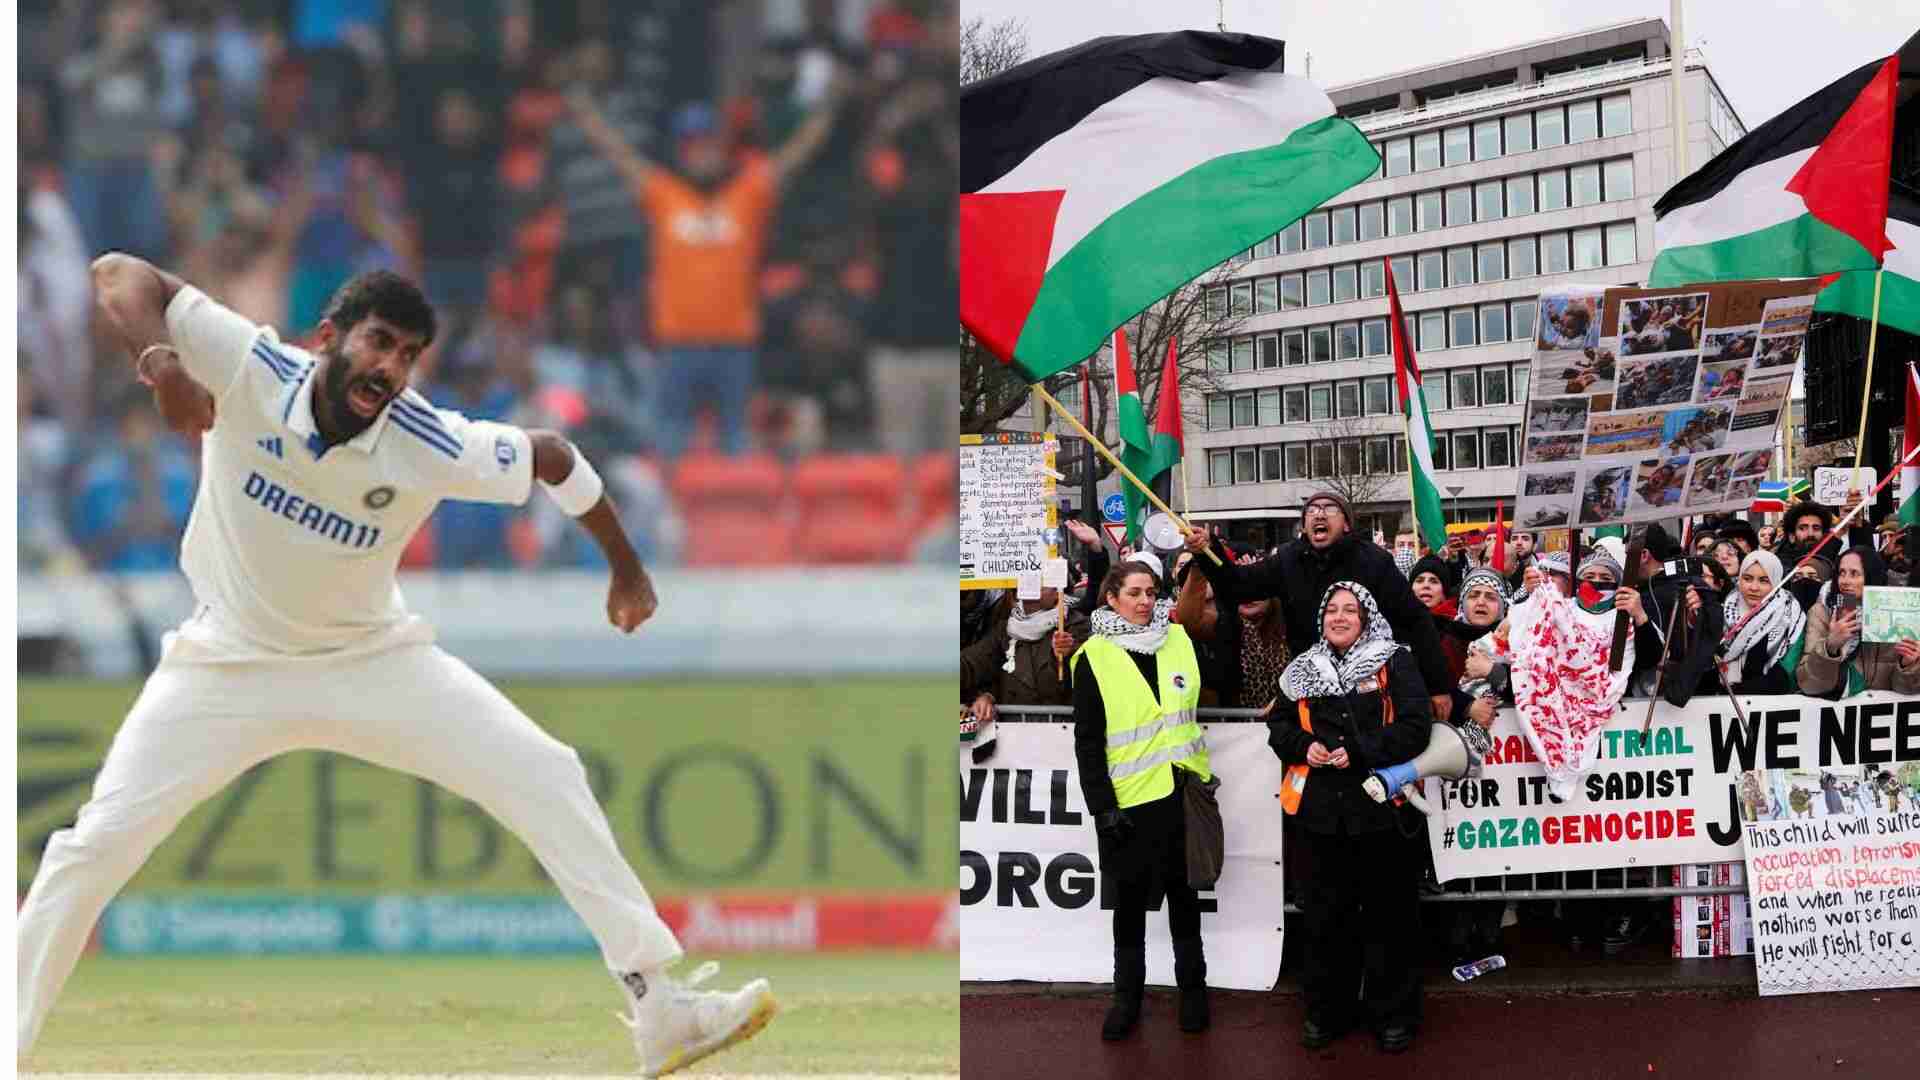 Wasim Jaffer Uses Bumrah’s Example To Take Jibe At England For Supporting Israel 